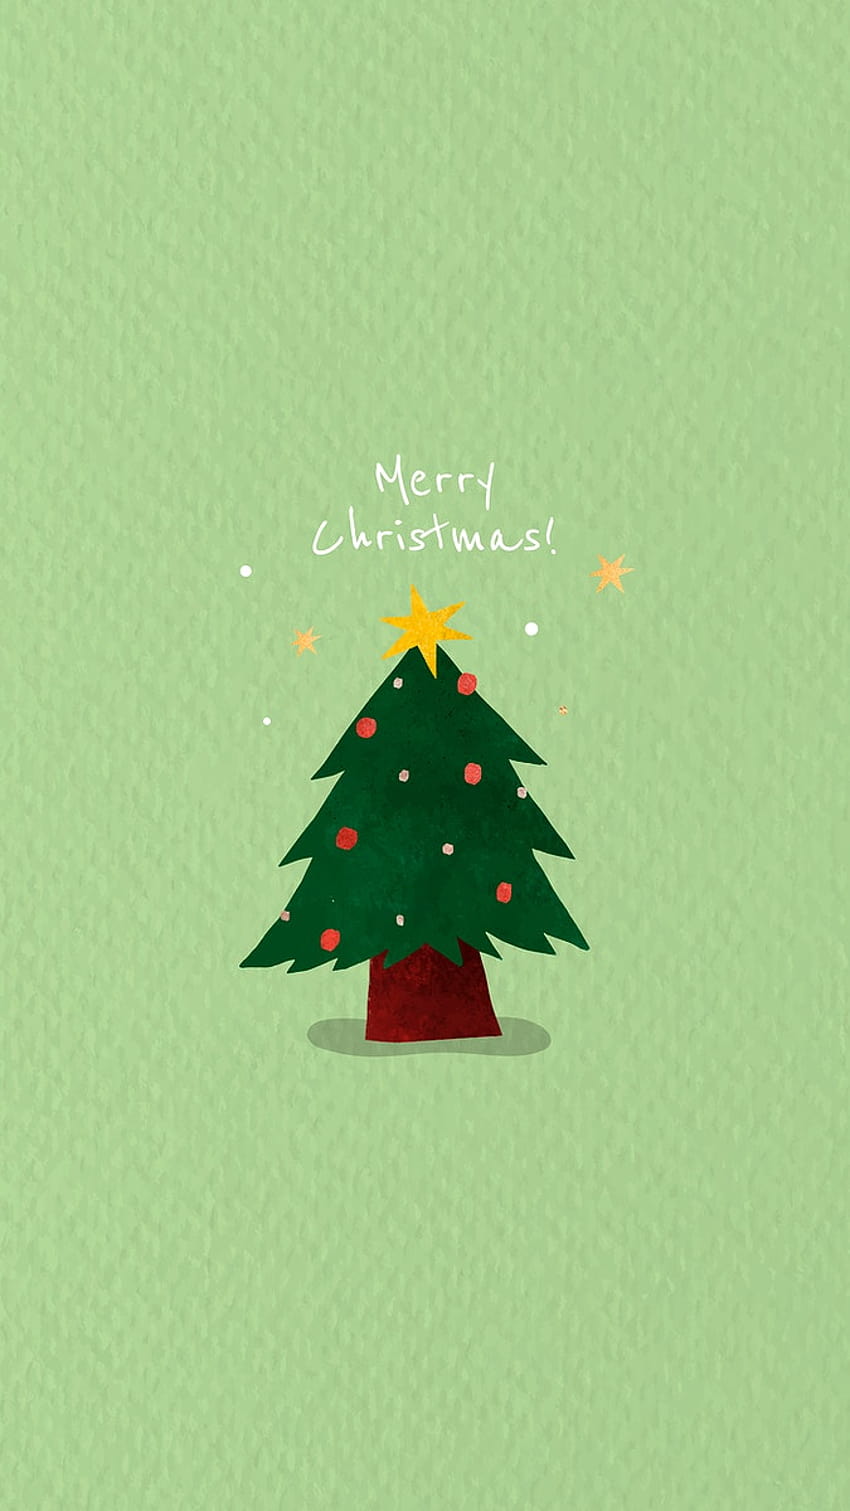 Green Christmas Wallpaper Background Wallpaper Image For Free Download   Pngtree